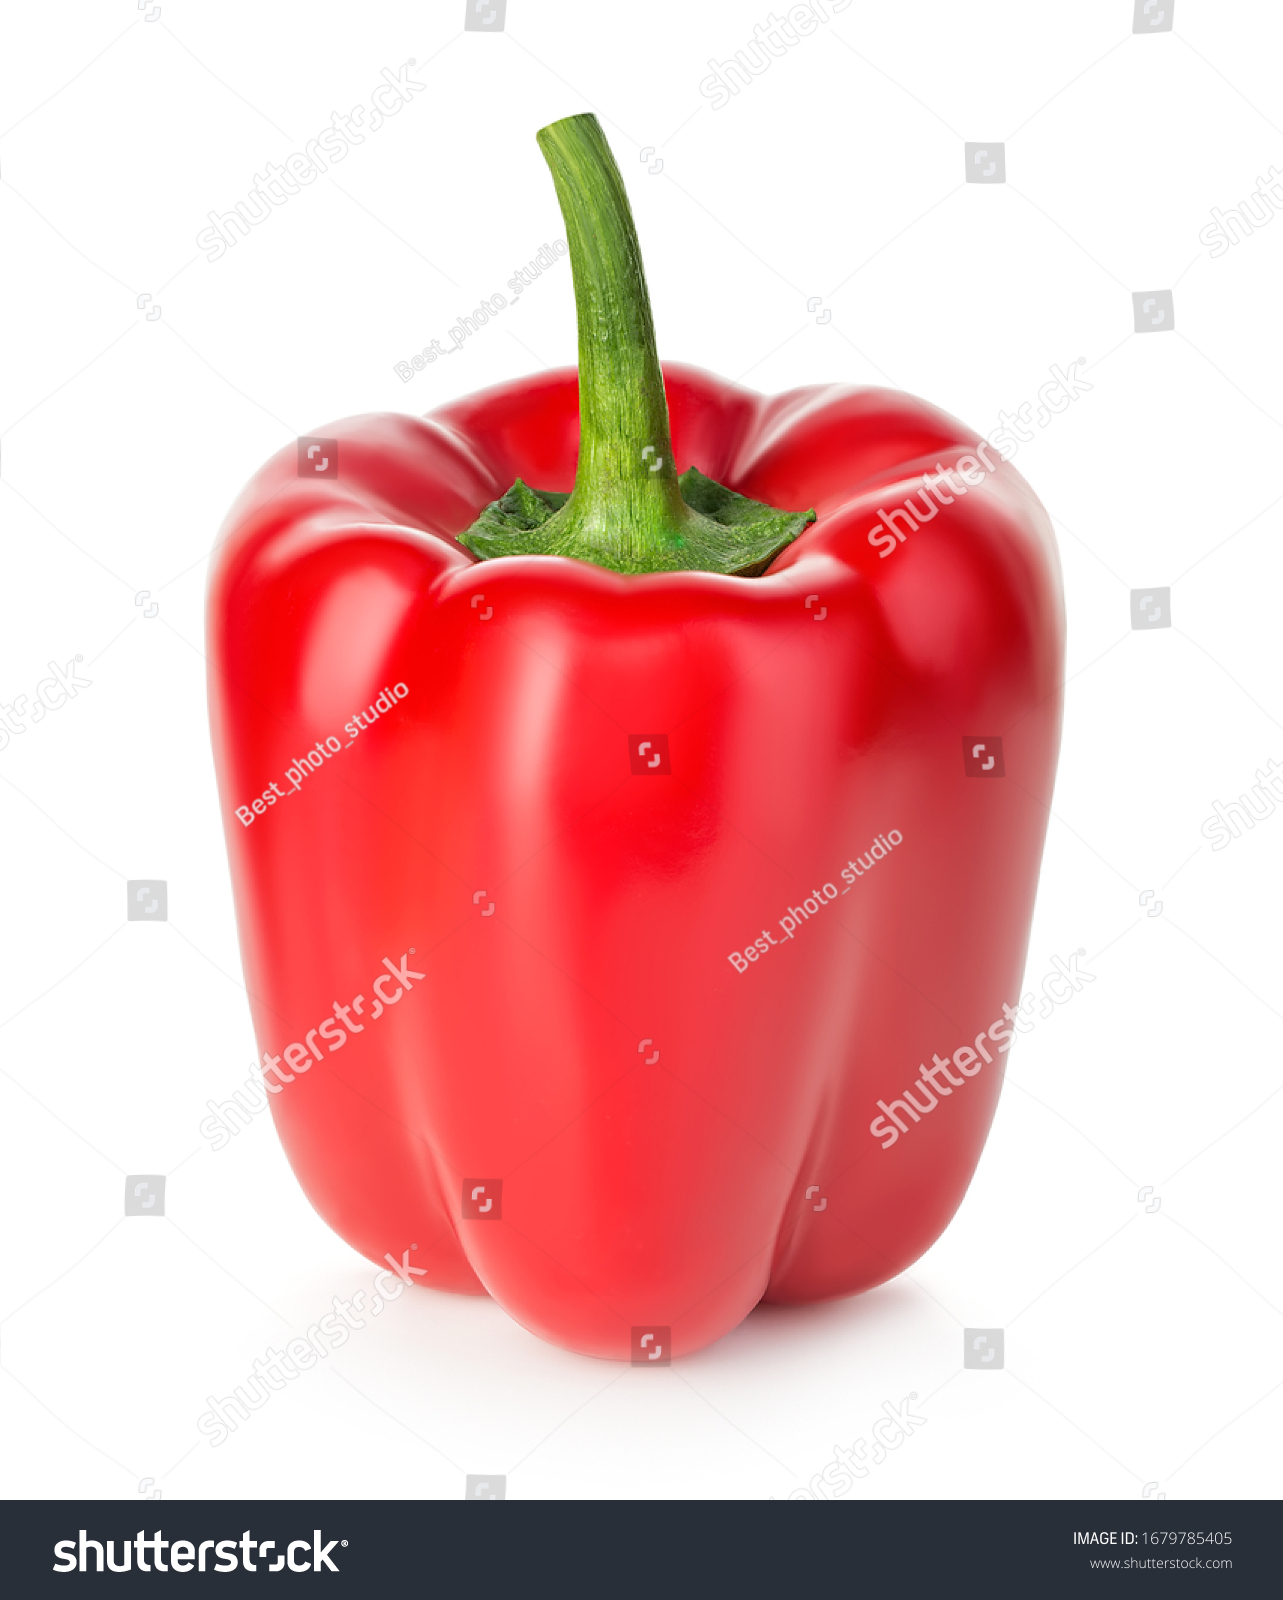 Red sweet pepper isolated on white background. #1679785405